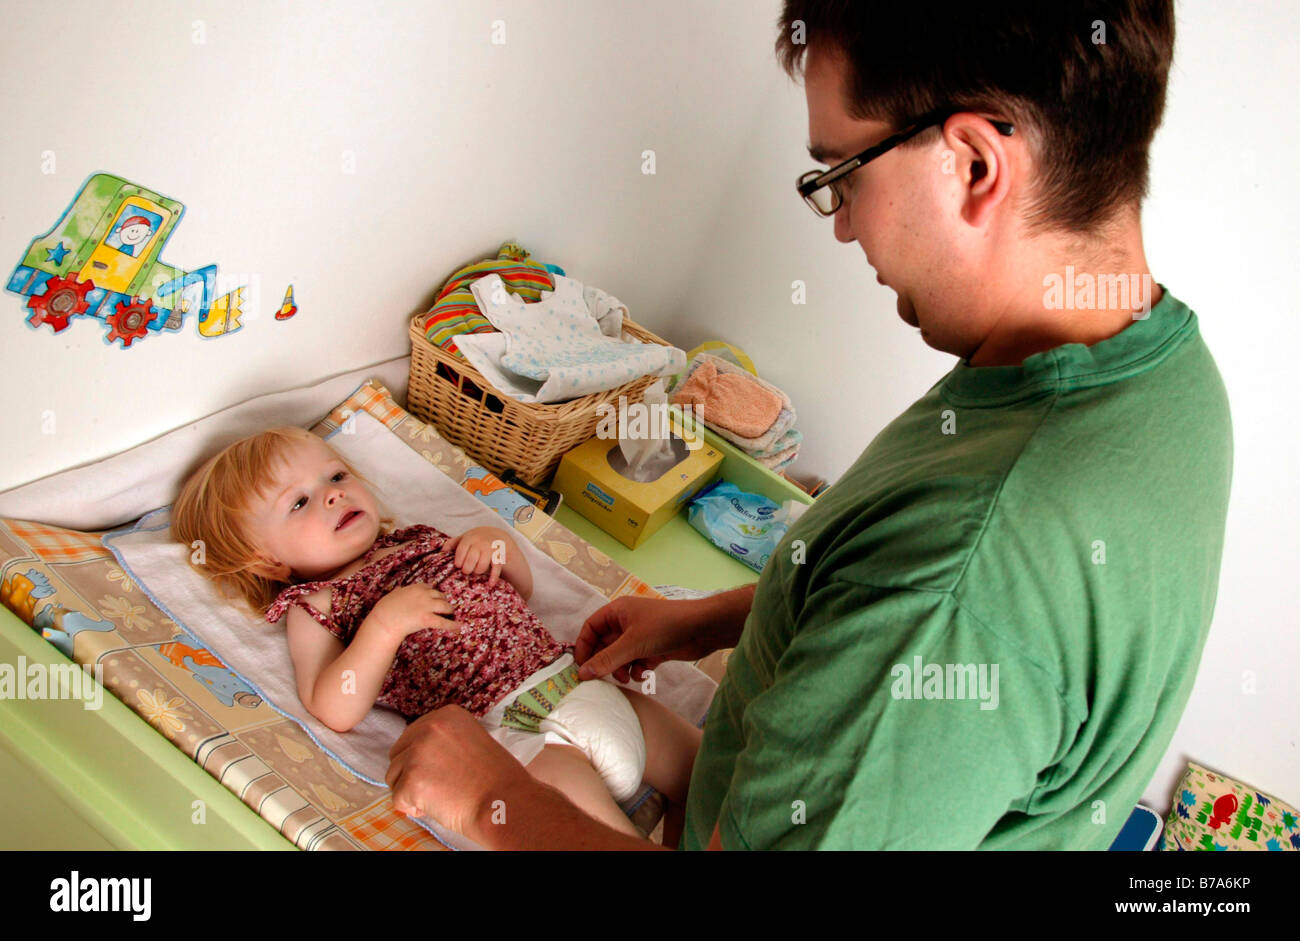 Father changing a baby's nappy Stock Photo